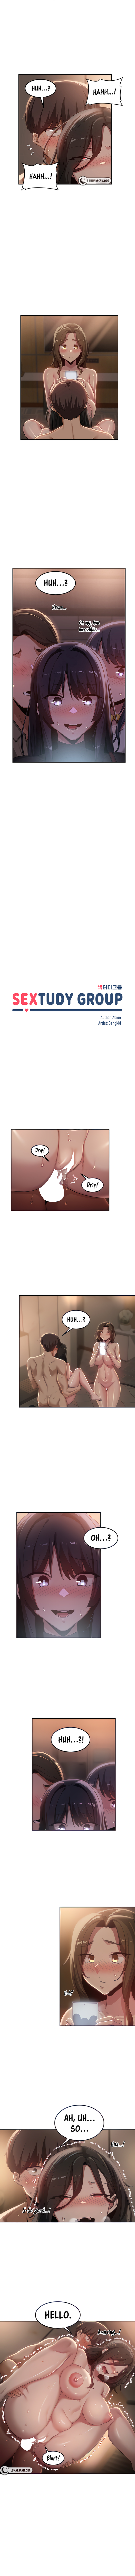 Panel Image 1 for chapter 99 of manhwa Sex Study Group on read.oppai.stream